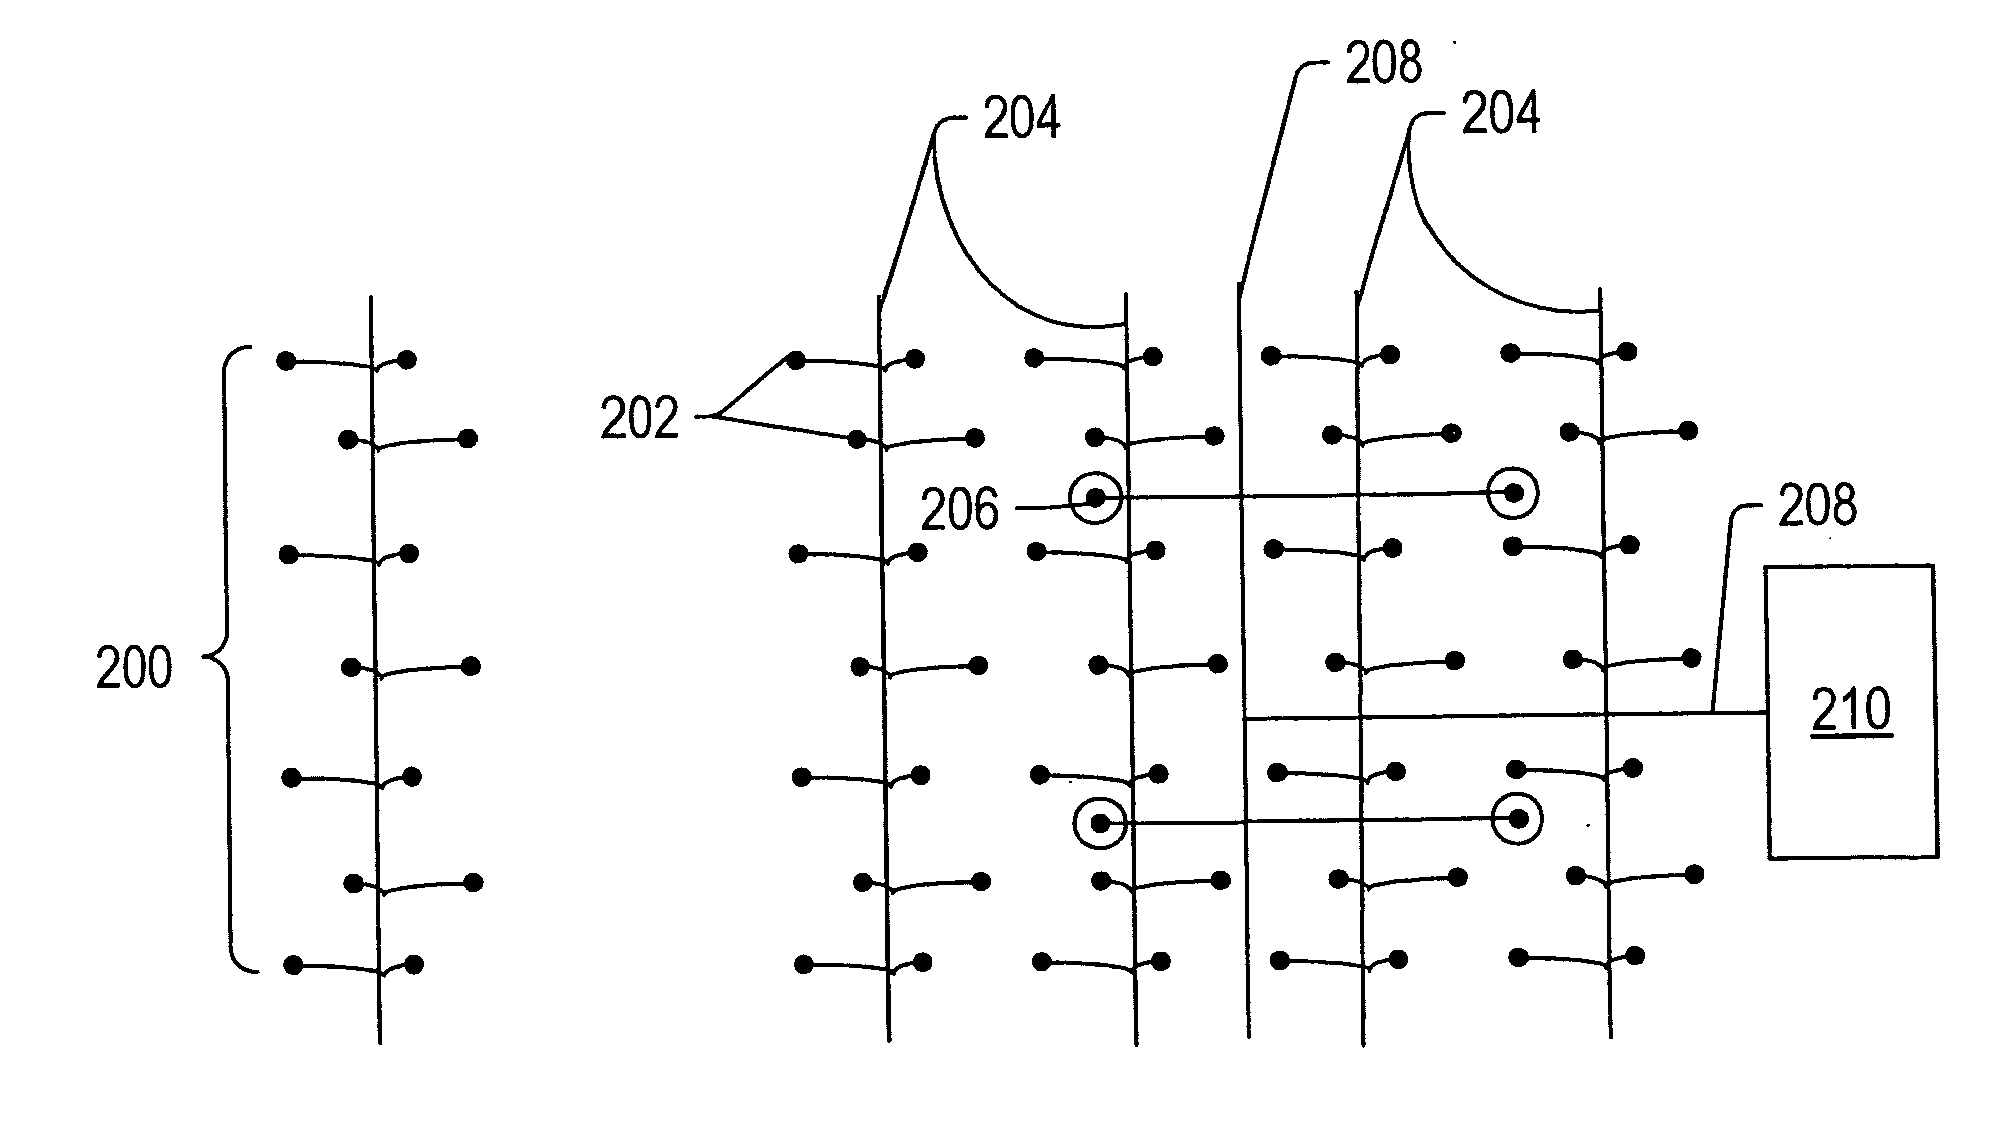 Methods of hydrotreating a liquid stream to remove clogging compounds